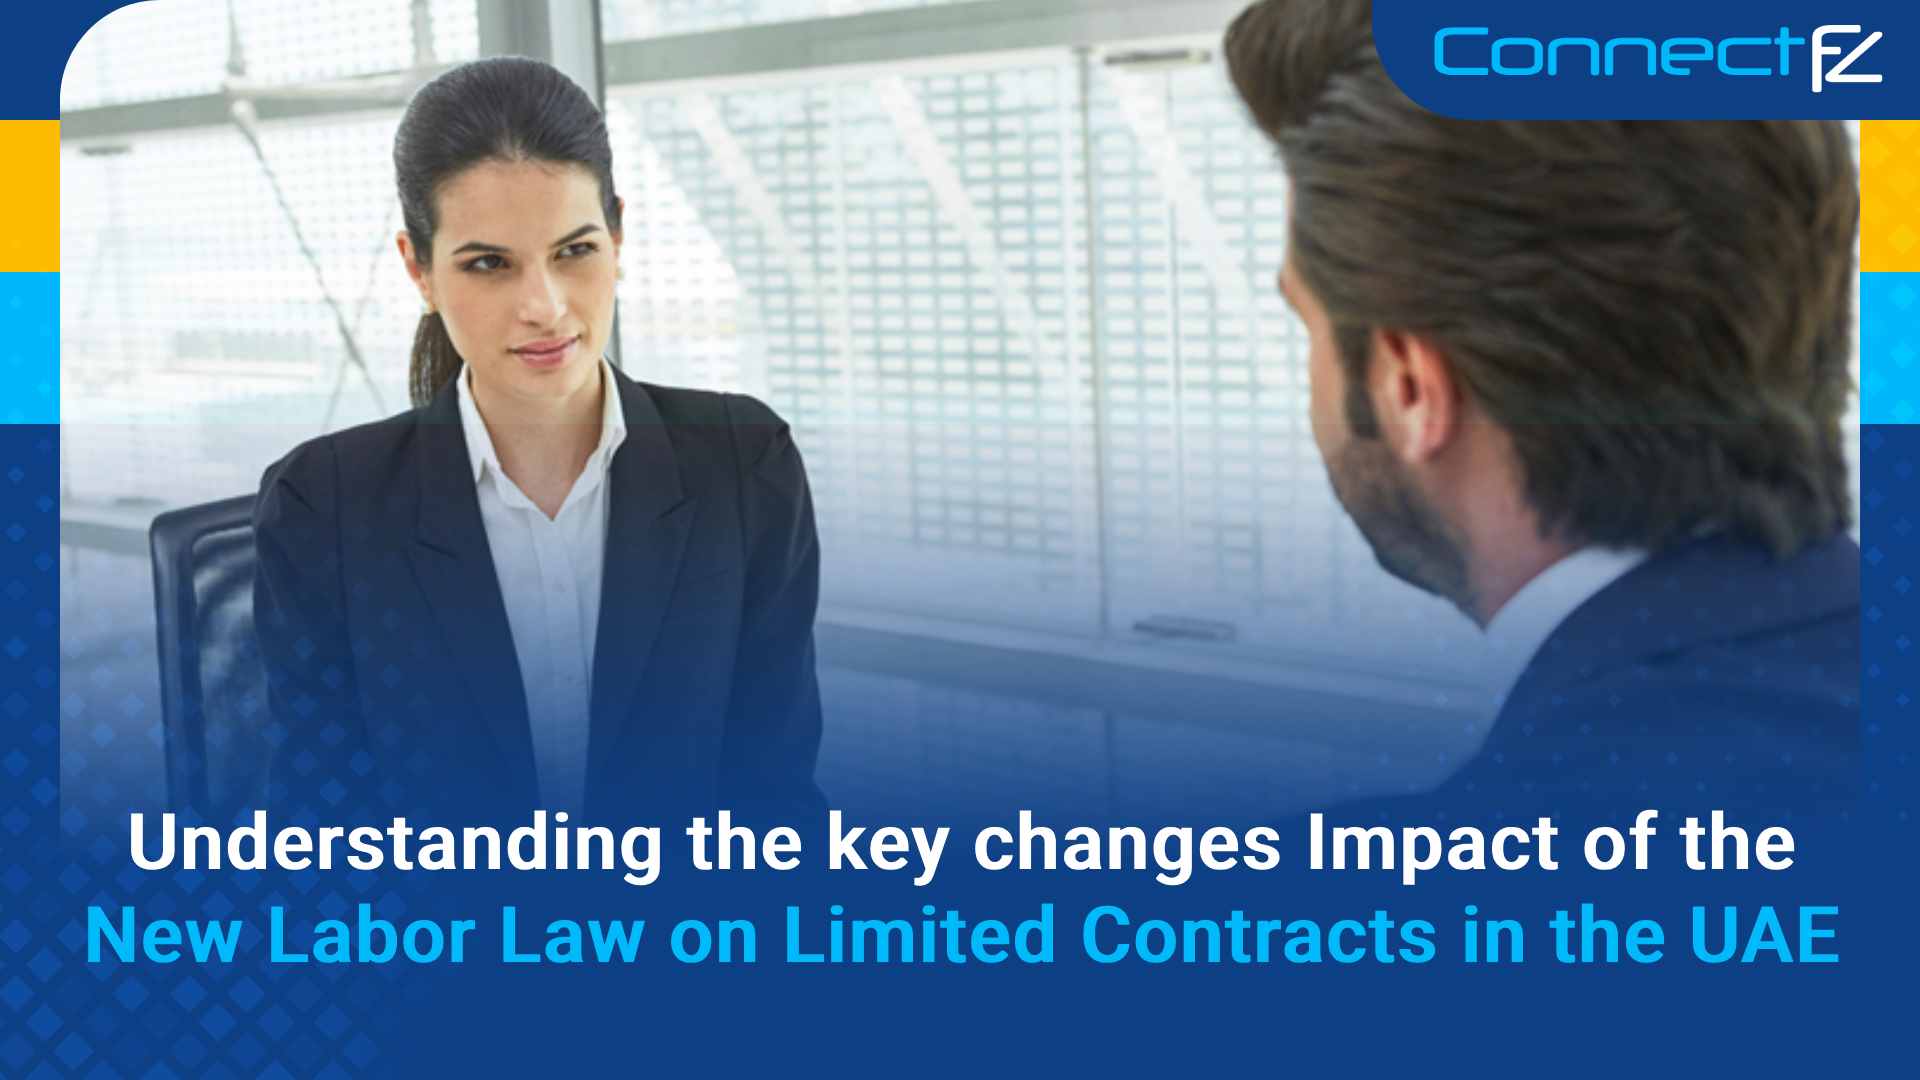 Understanding the key changes Impact of the New Labor Law on Limited Contracts in the UAE